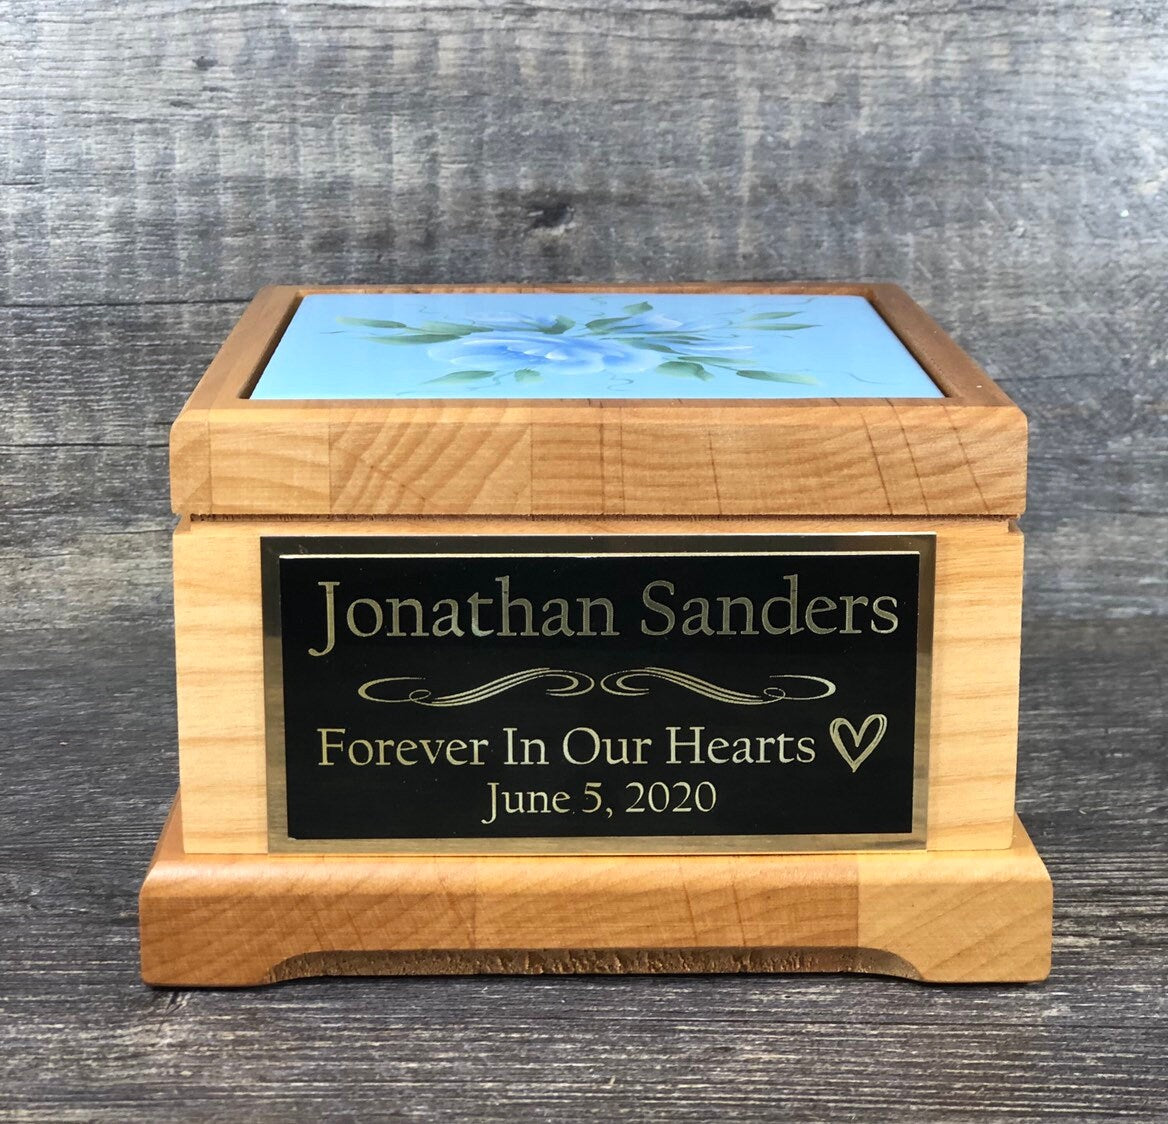 Baby Urn Hand Painted Blue Roses Boy Infant Child Urn For Ashes Baby Cremation Memorial Keepsake Human Personalized Engraved Tag Red Alder